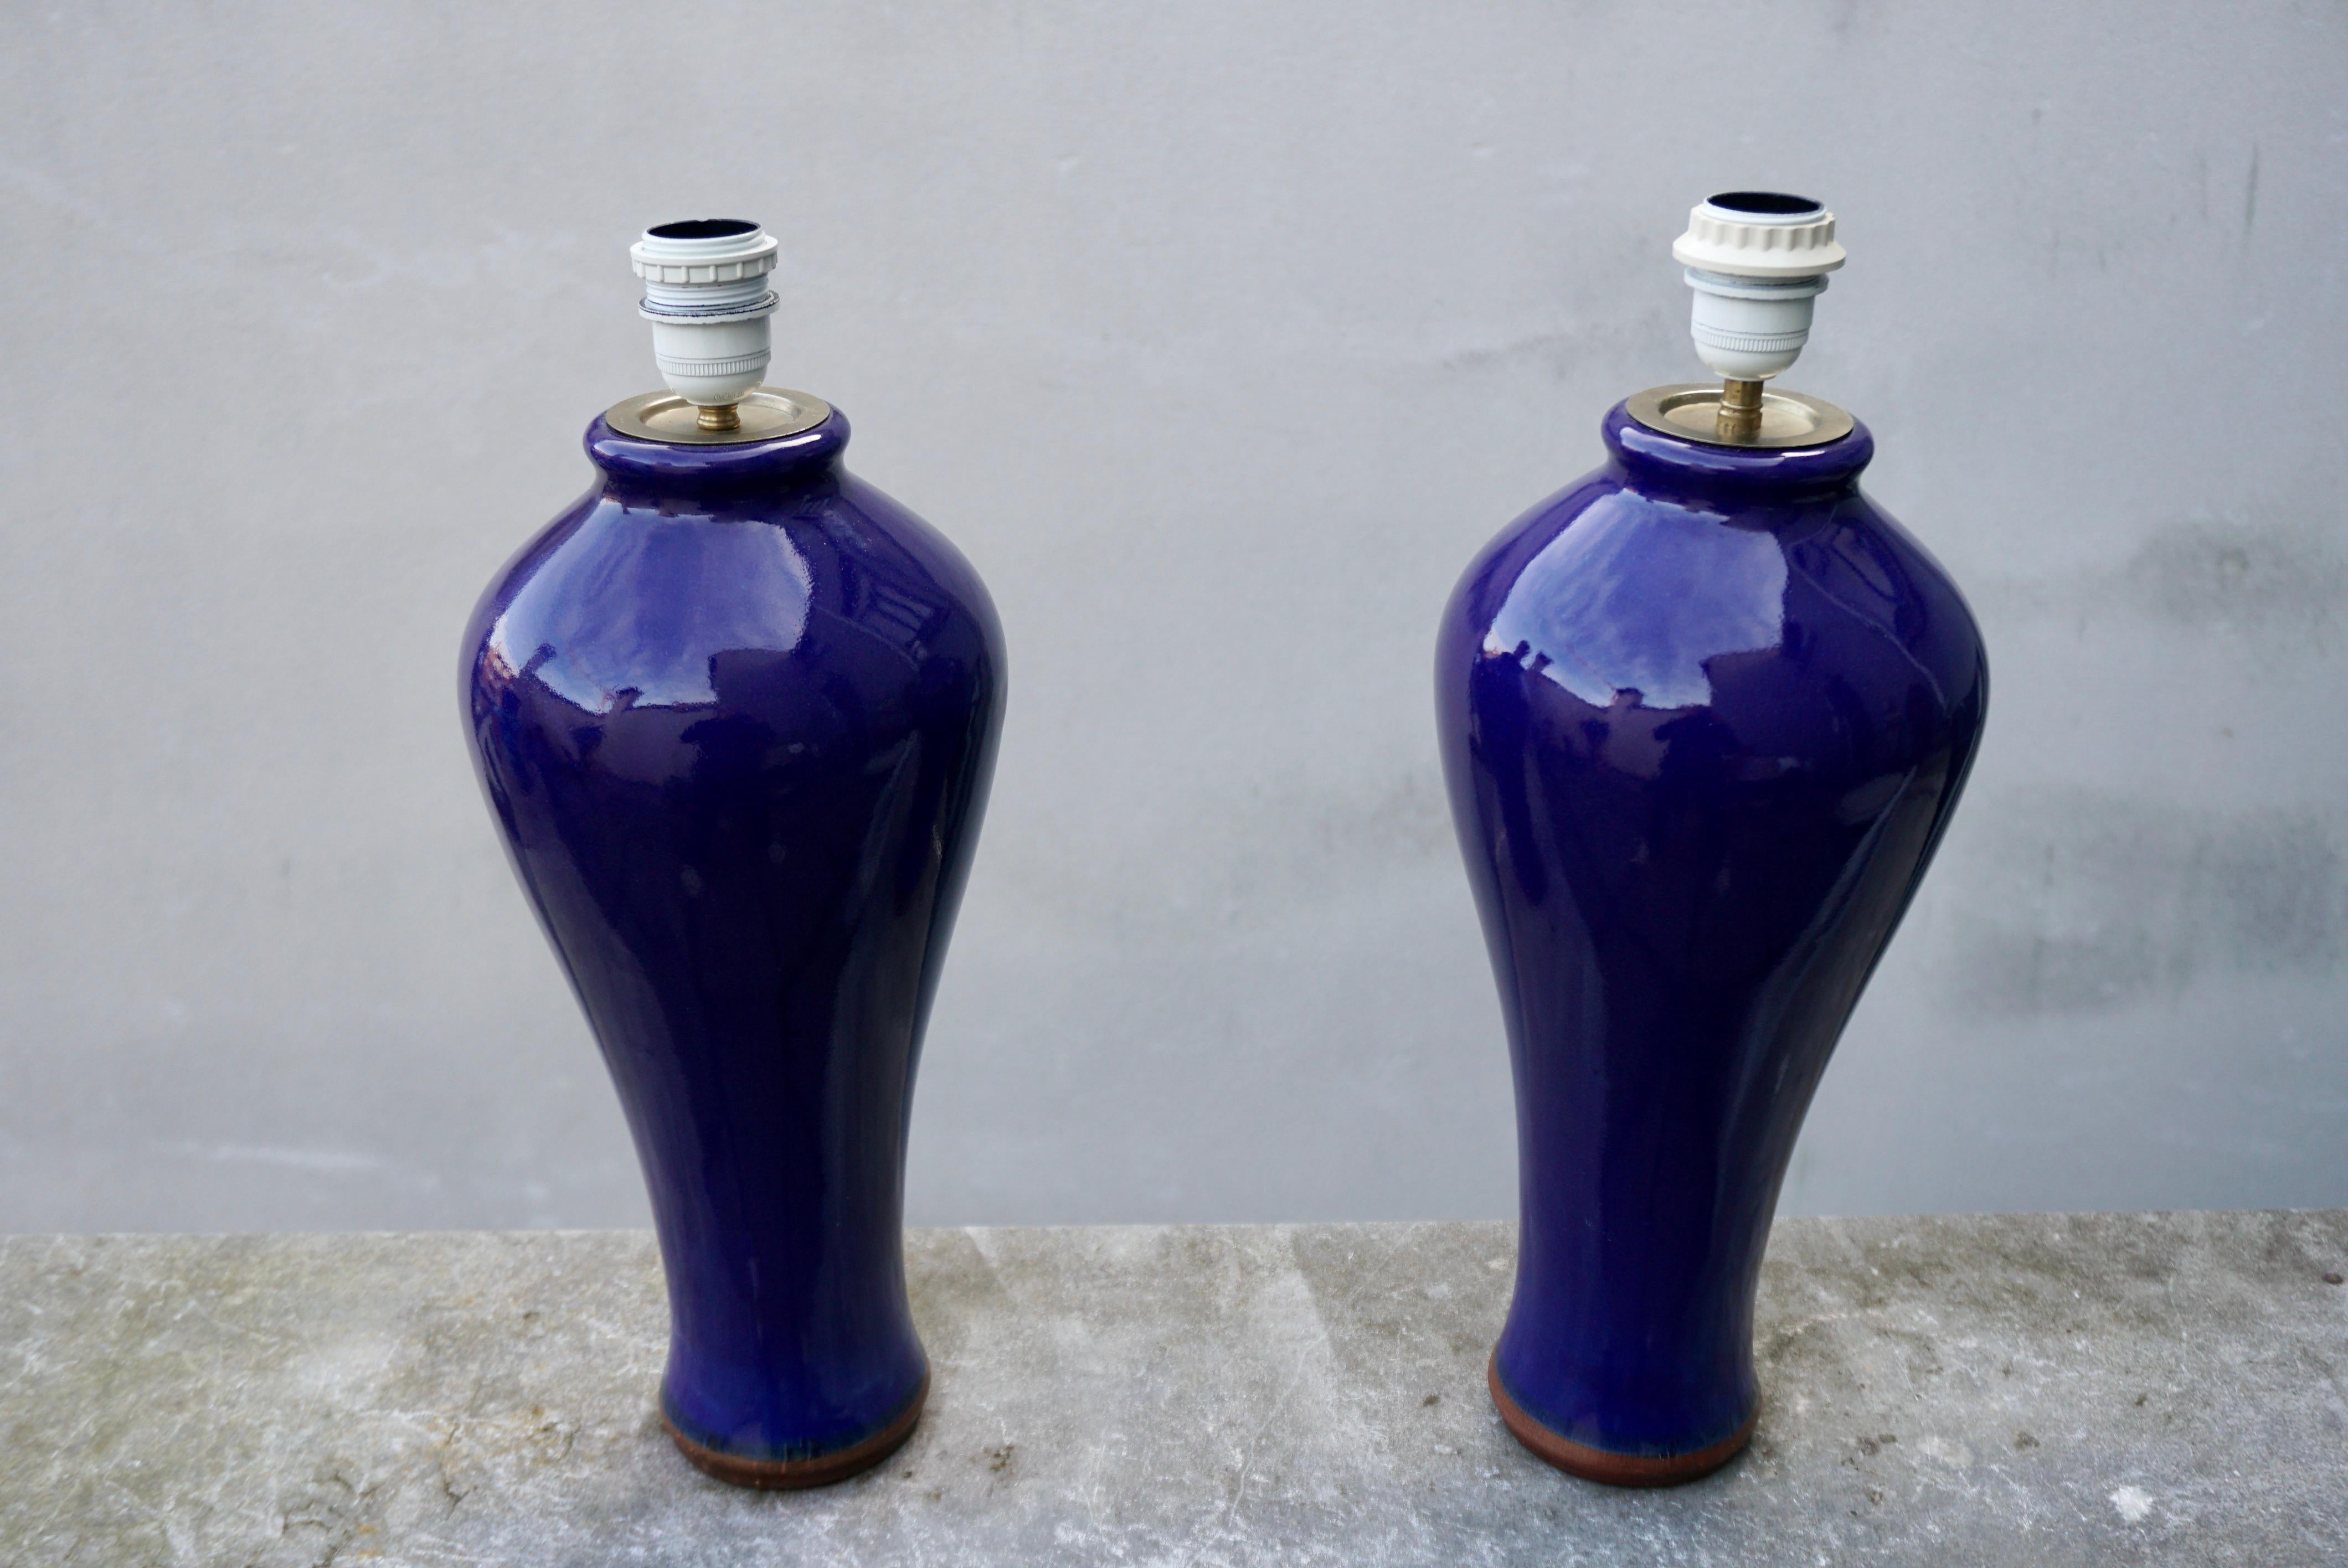 Pair of elegant ceramic glazed cobalt Blue Vases, Wired into Lamps.

The height of the lamp including the socket is: 18.8